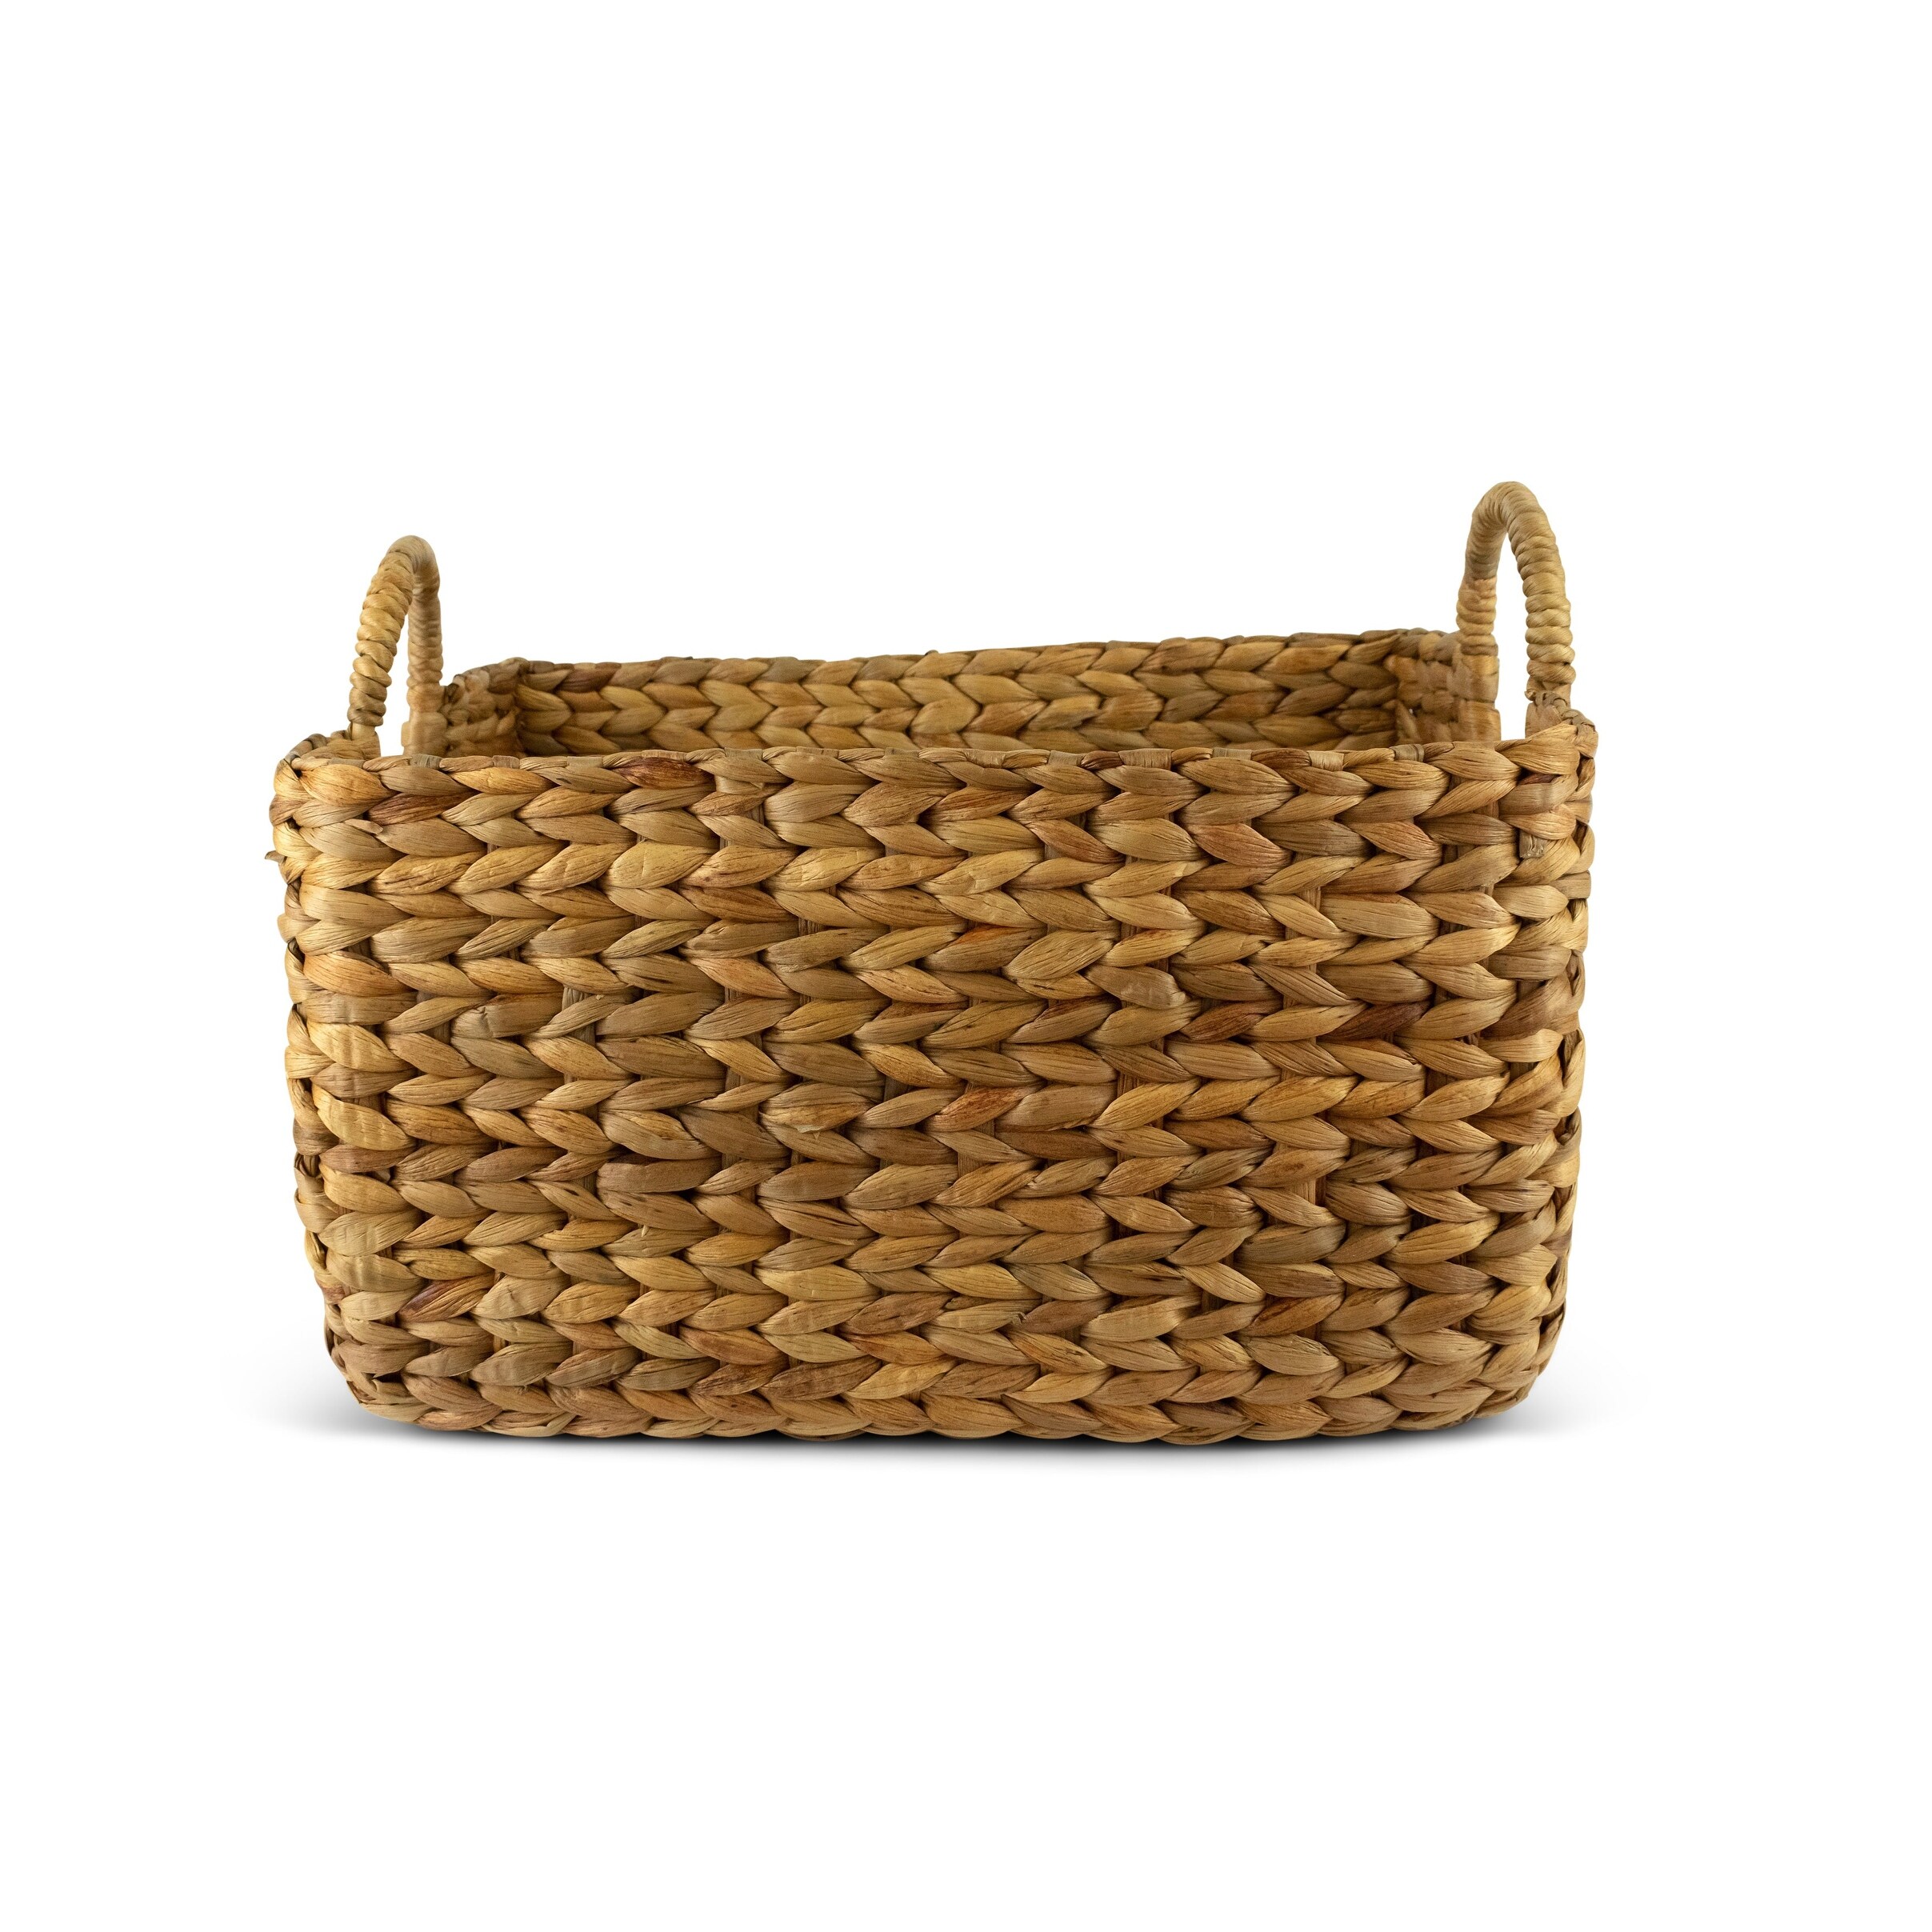 https://ak1.ostkcdn.com/images/products/is/images/direct/e2386fd802c09f1ff3068dc375c00052b79ff3a5/Large-Hand-Woven-Water-Hyacinth-Storage-Basket-Shelf-Organizer-Rectangular-Wicker-Baskets-with-Handles-15-x-11-x-11-inches.jpg